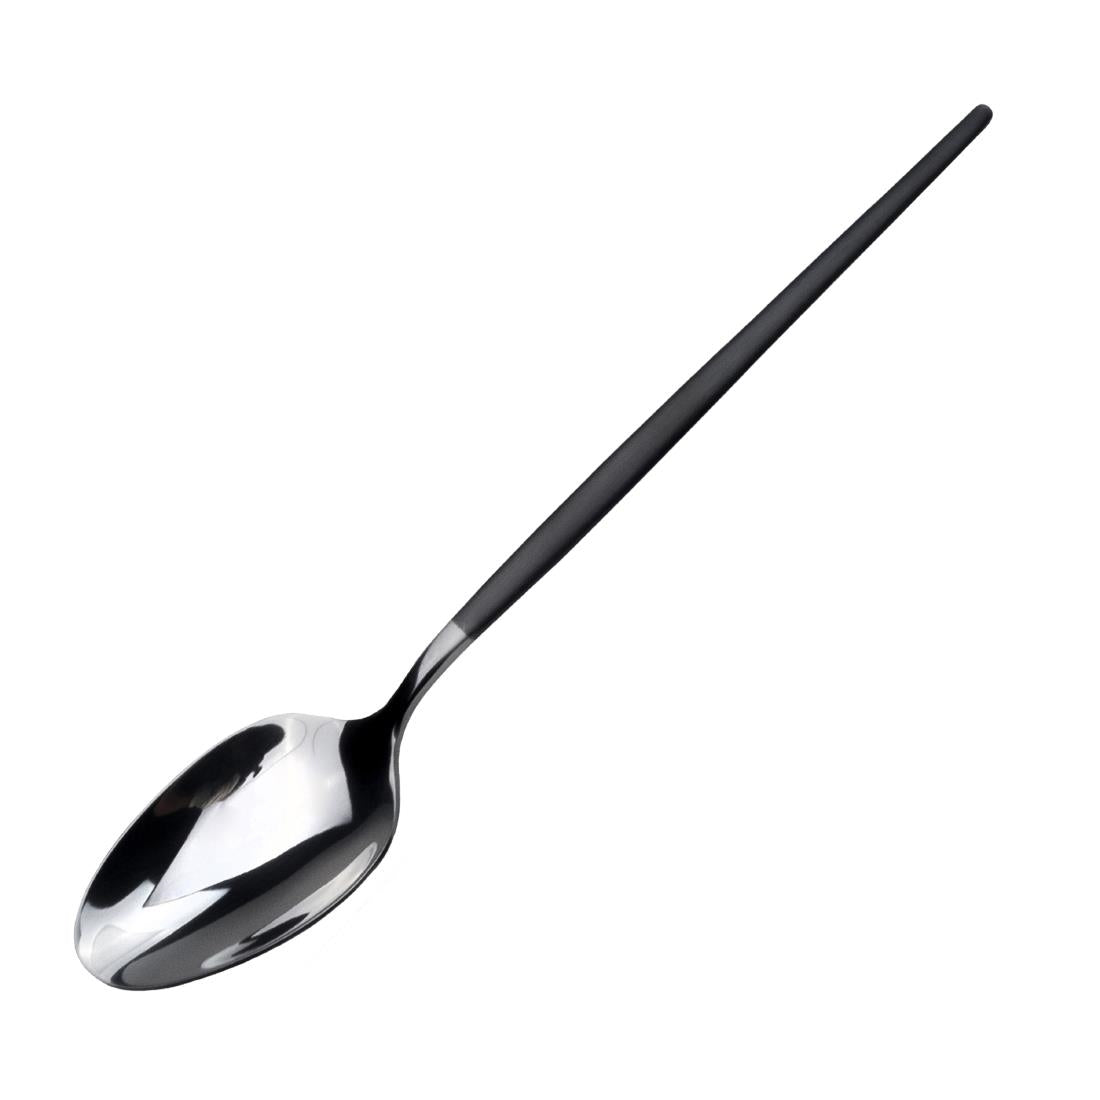 DX683 Amefa Tablespoon Black (Pack of 12)